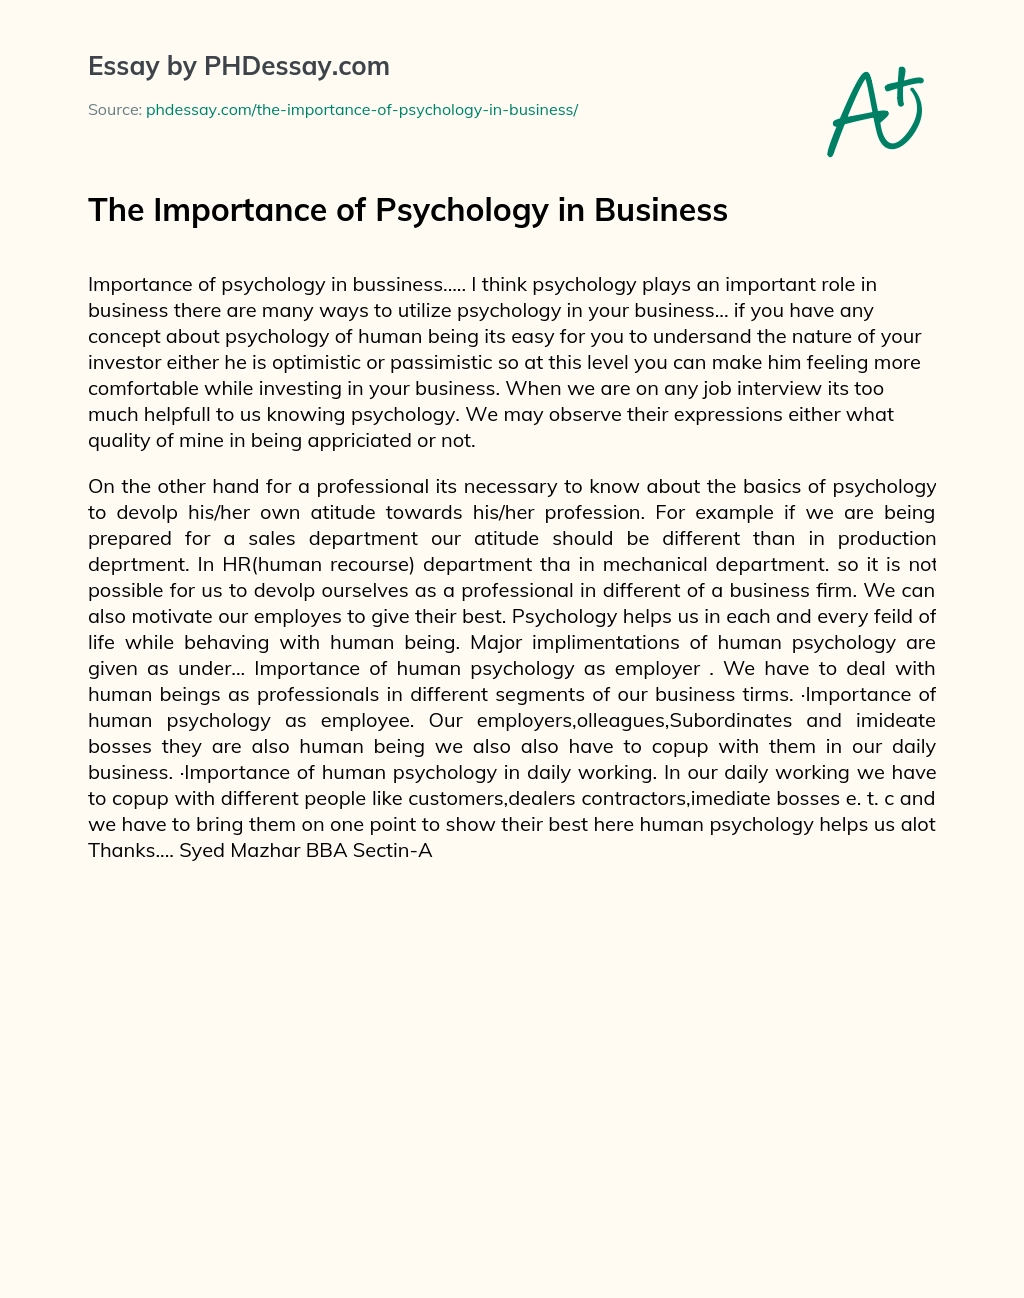 The Importance of Psychology in Business essay